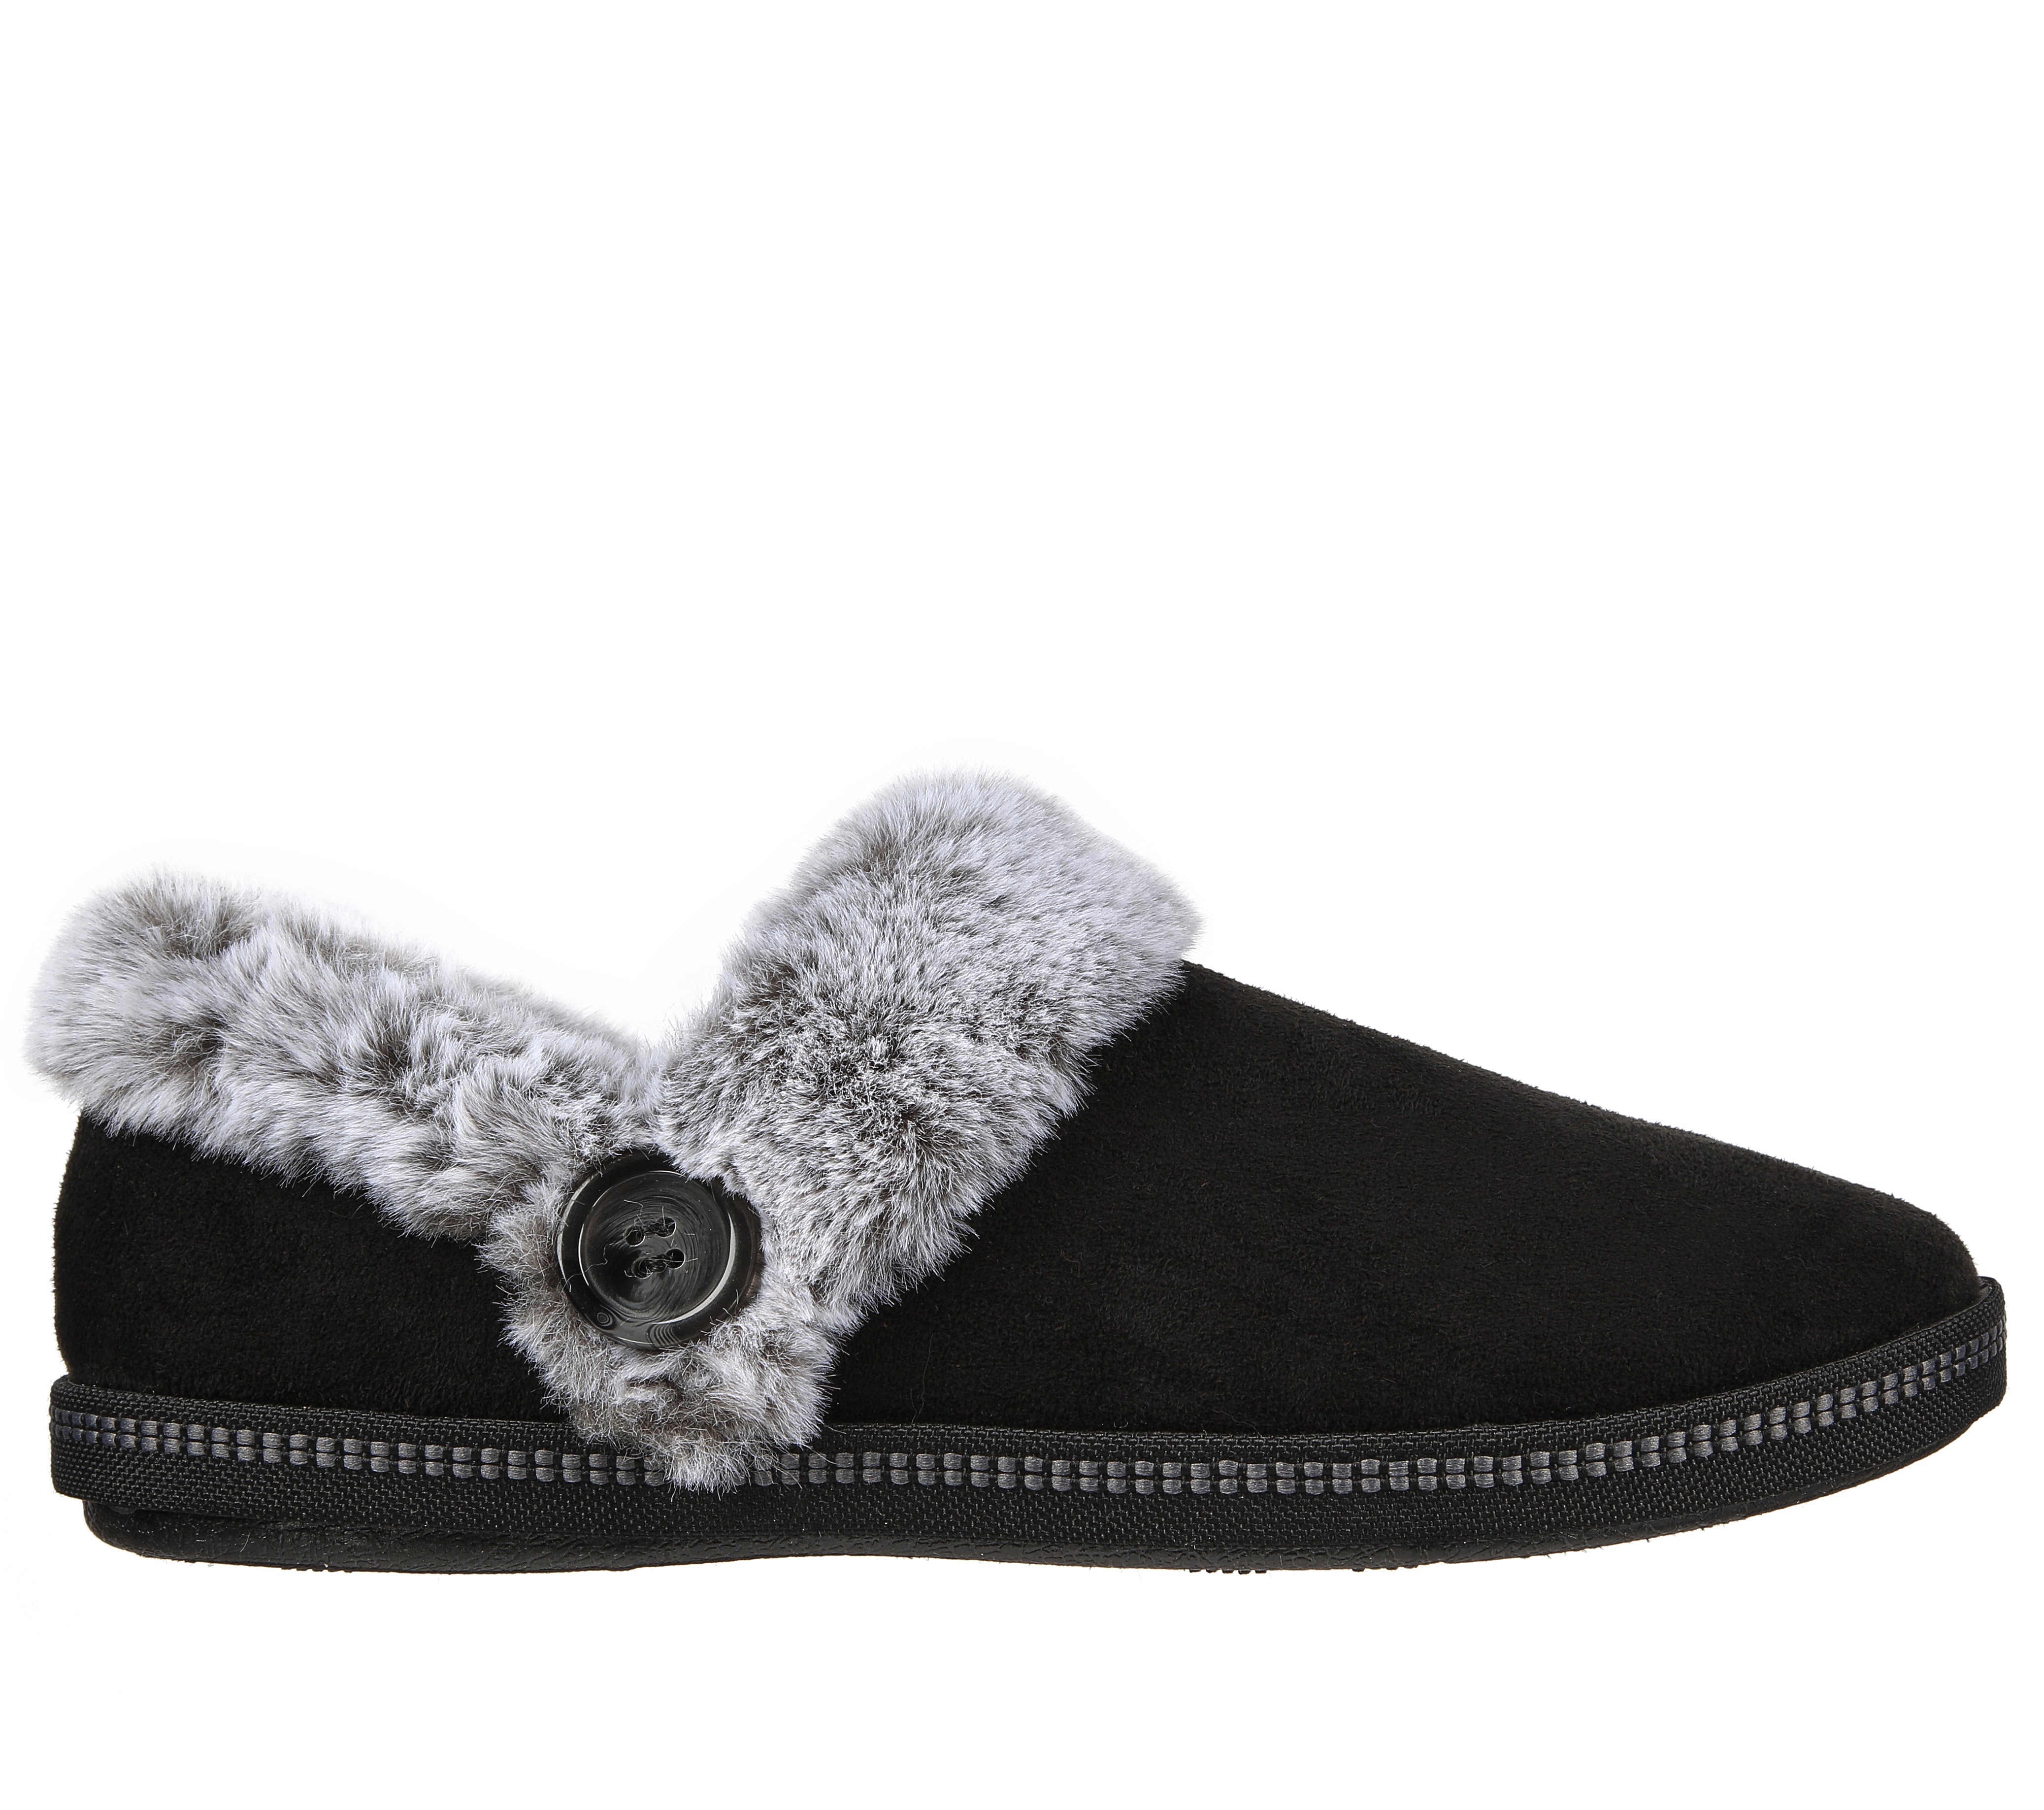 Skechers Cozy Campfire Slipper Boots w/ FauxFur-Meant to Be, Size 5-1/2 Medium, Chestnut